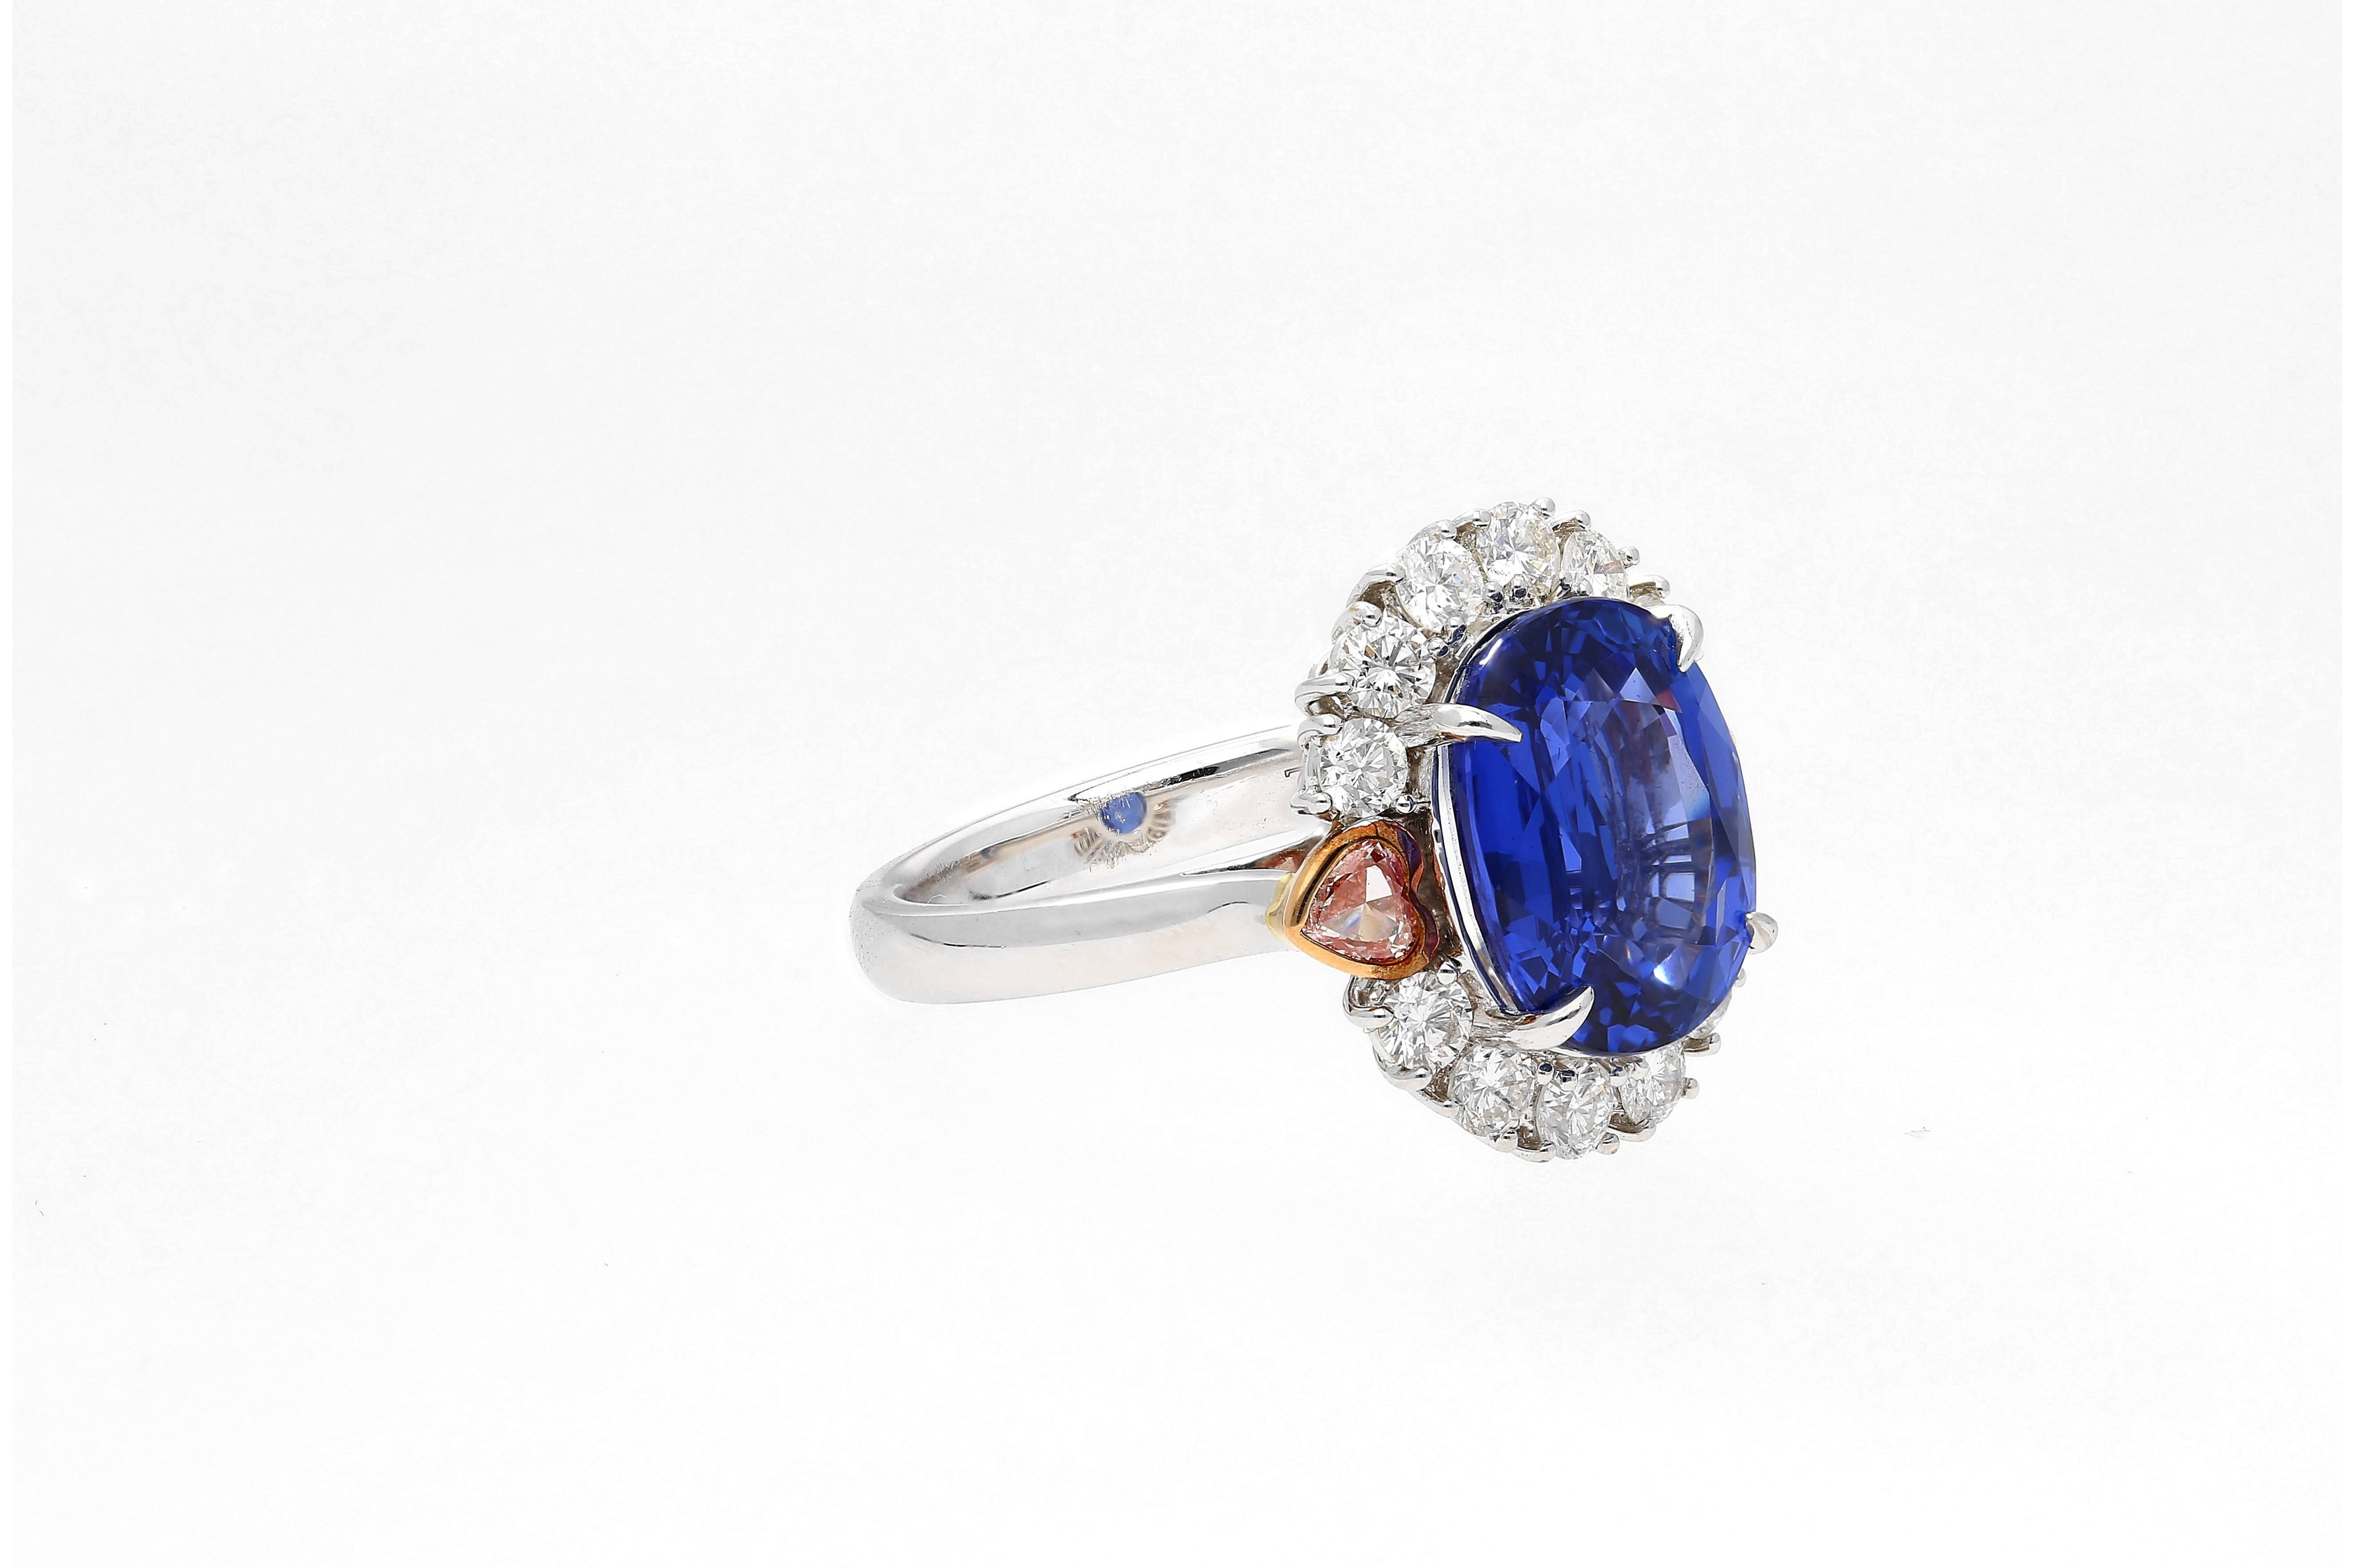 Centering an 7.25 Carat Cornflower Blue Ceylon (Sri-Lanka) Sapphire, accented by Heart-Shape Pink Diamonds and Round-Brilliant Cut White Diamonds, and set in 18K White Gold, this unique modern gem is a testament to the fantastic design team at Gad &